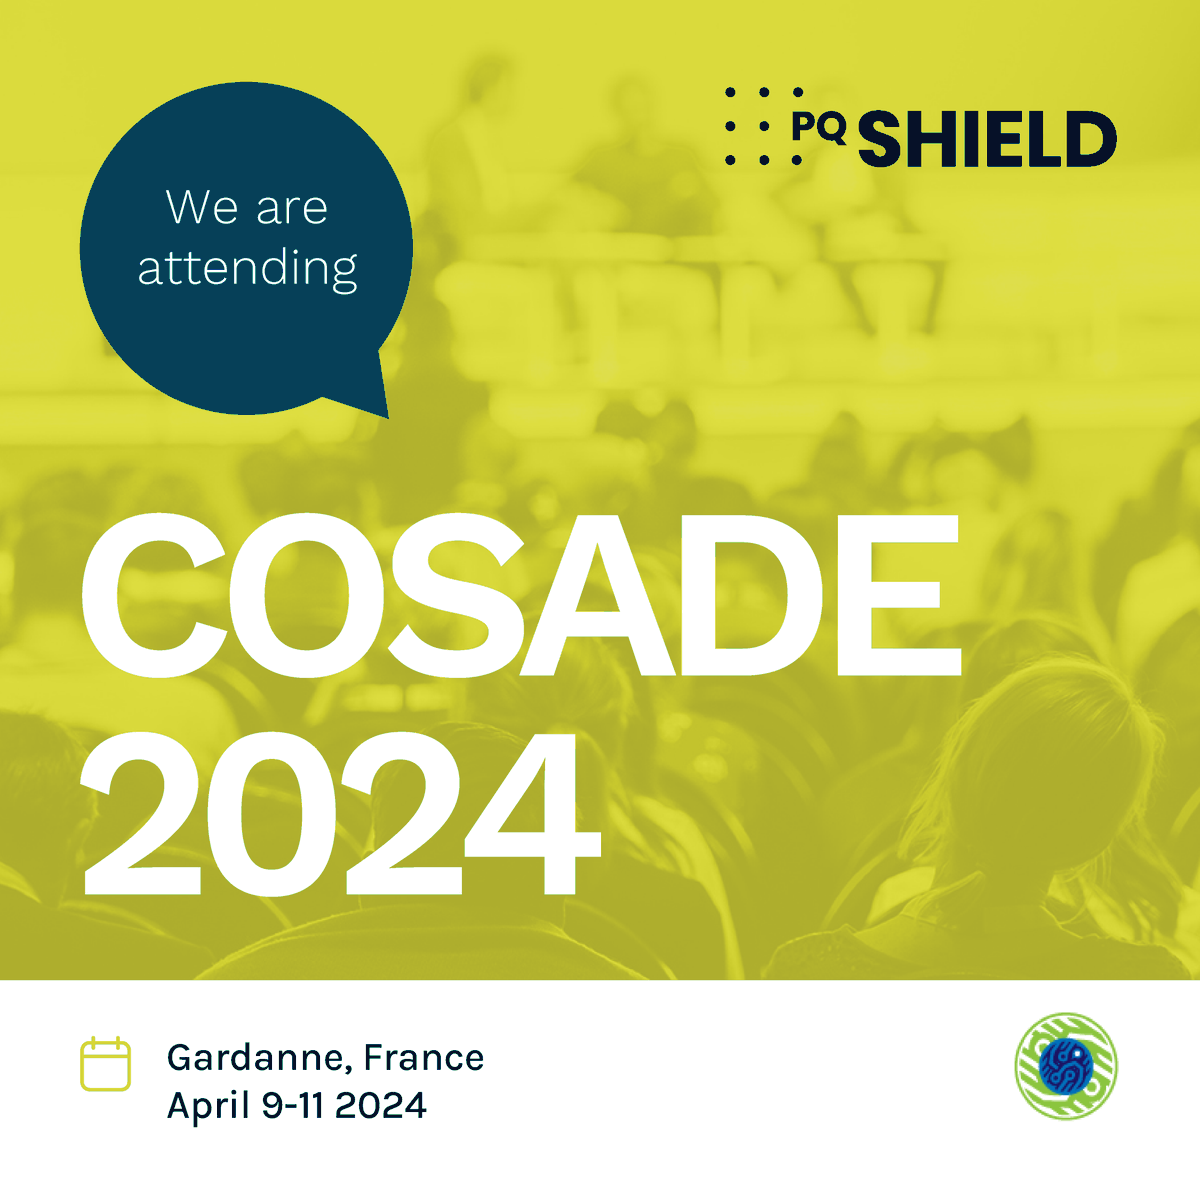 Sebastien Riou, our Director of Product Security Architecture will be representing PQShield at COSADE until April 11th. #cryptography #cybersecurity #sidechannel